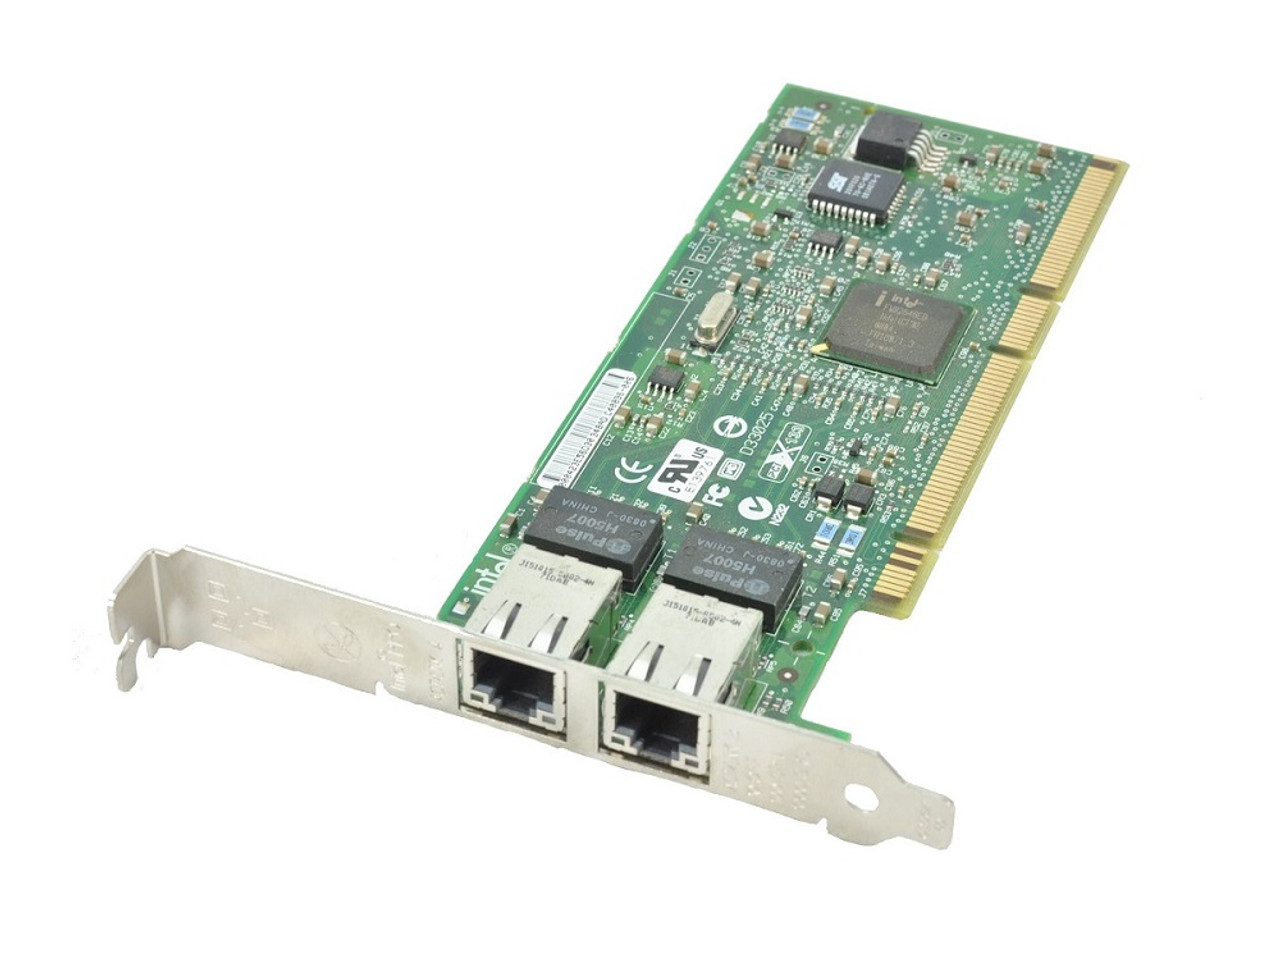 652498-001 - HP Ethernet 1GB 2-Port 361flb Adapter Network Adapter 2 Ports